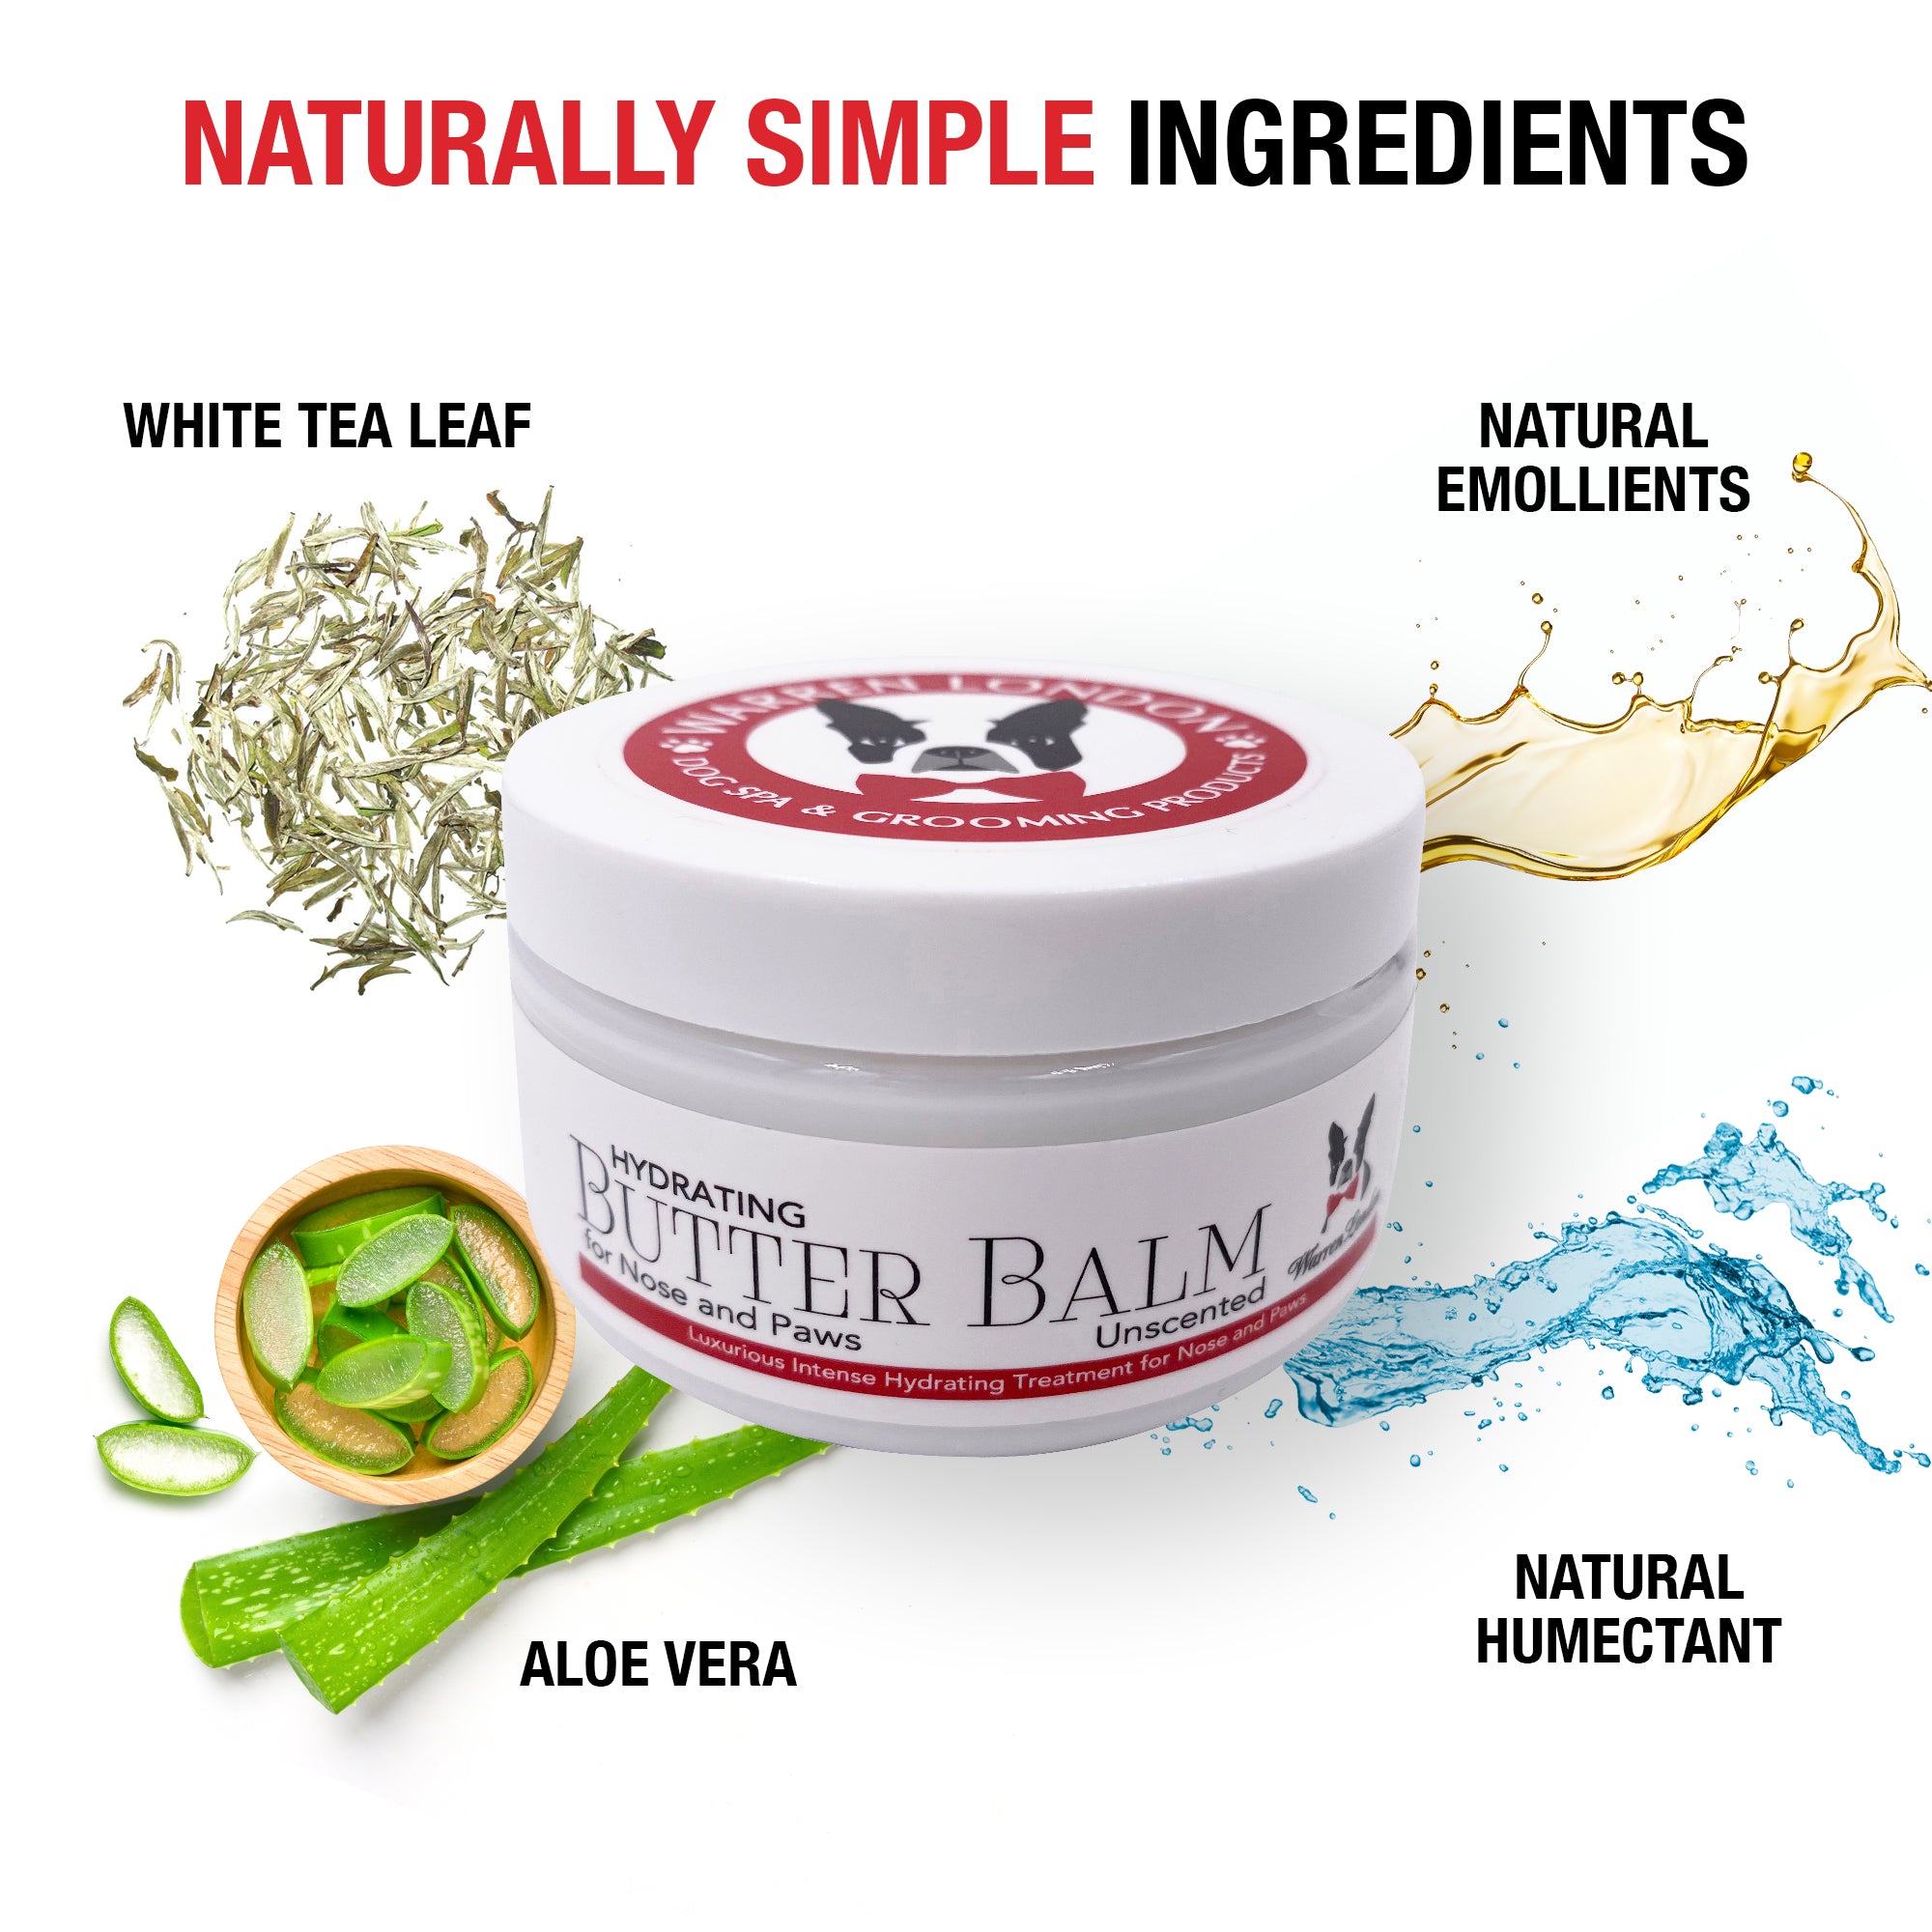 Hydrating Butter Balm - For Nose and Paws Spa Product Warren London 